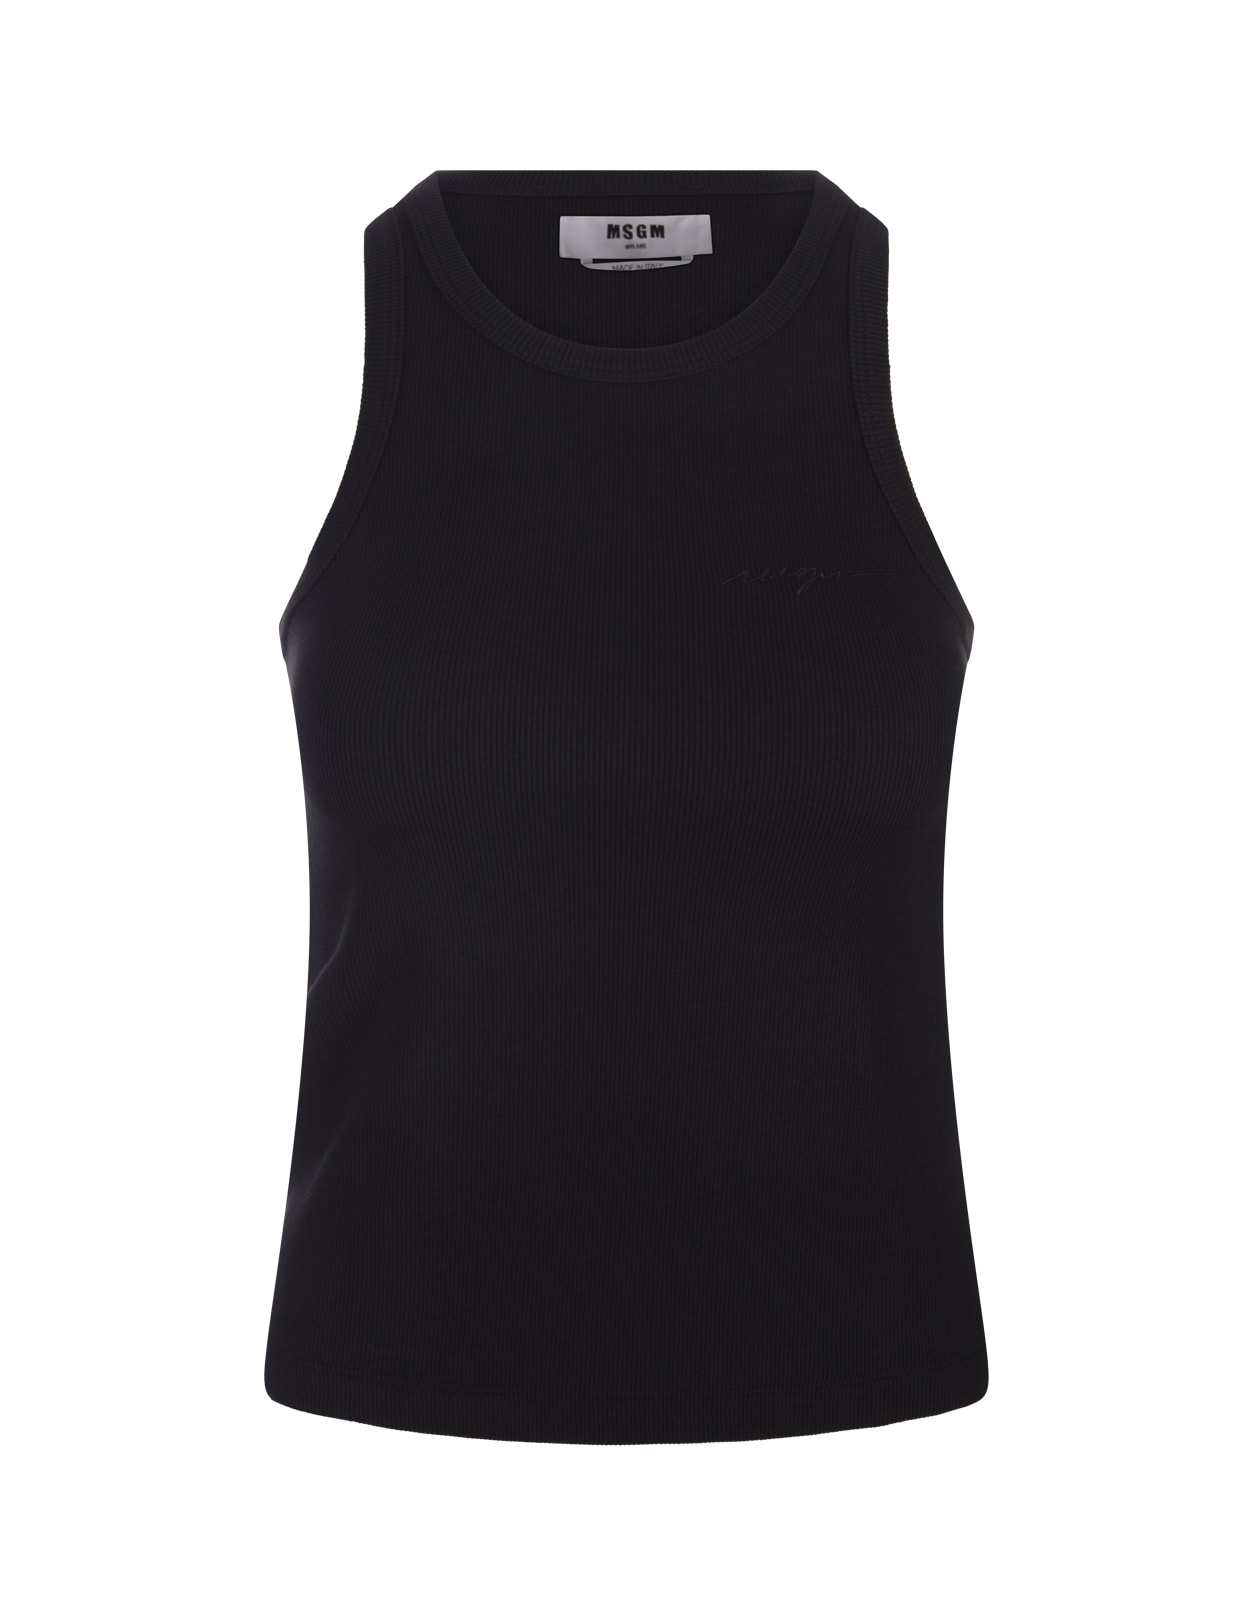 Black Ribbed Tank Top With Msgm Signature